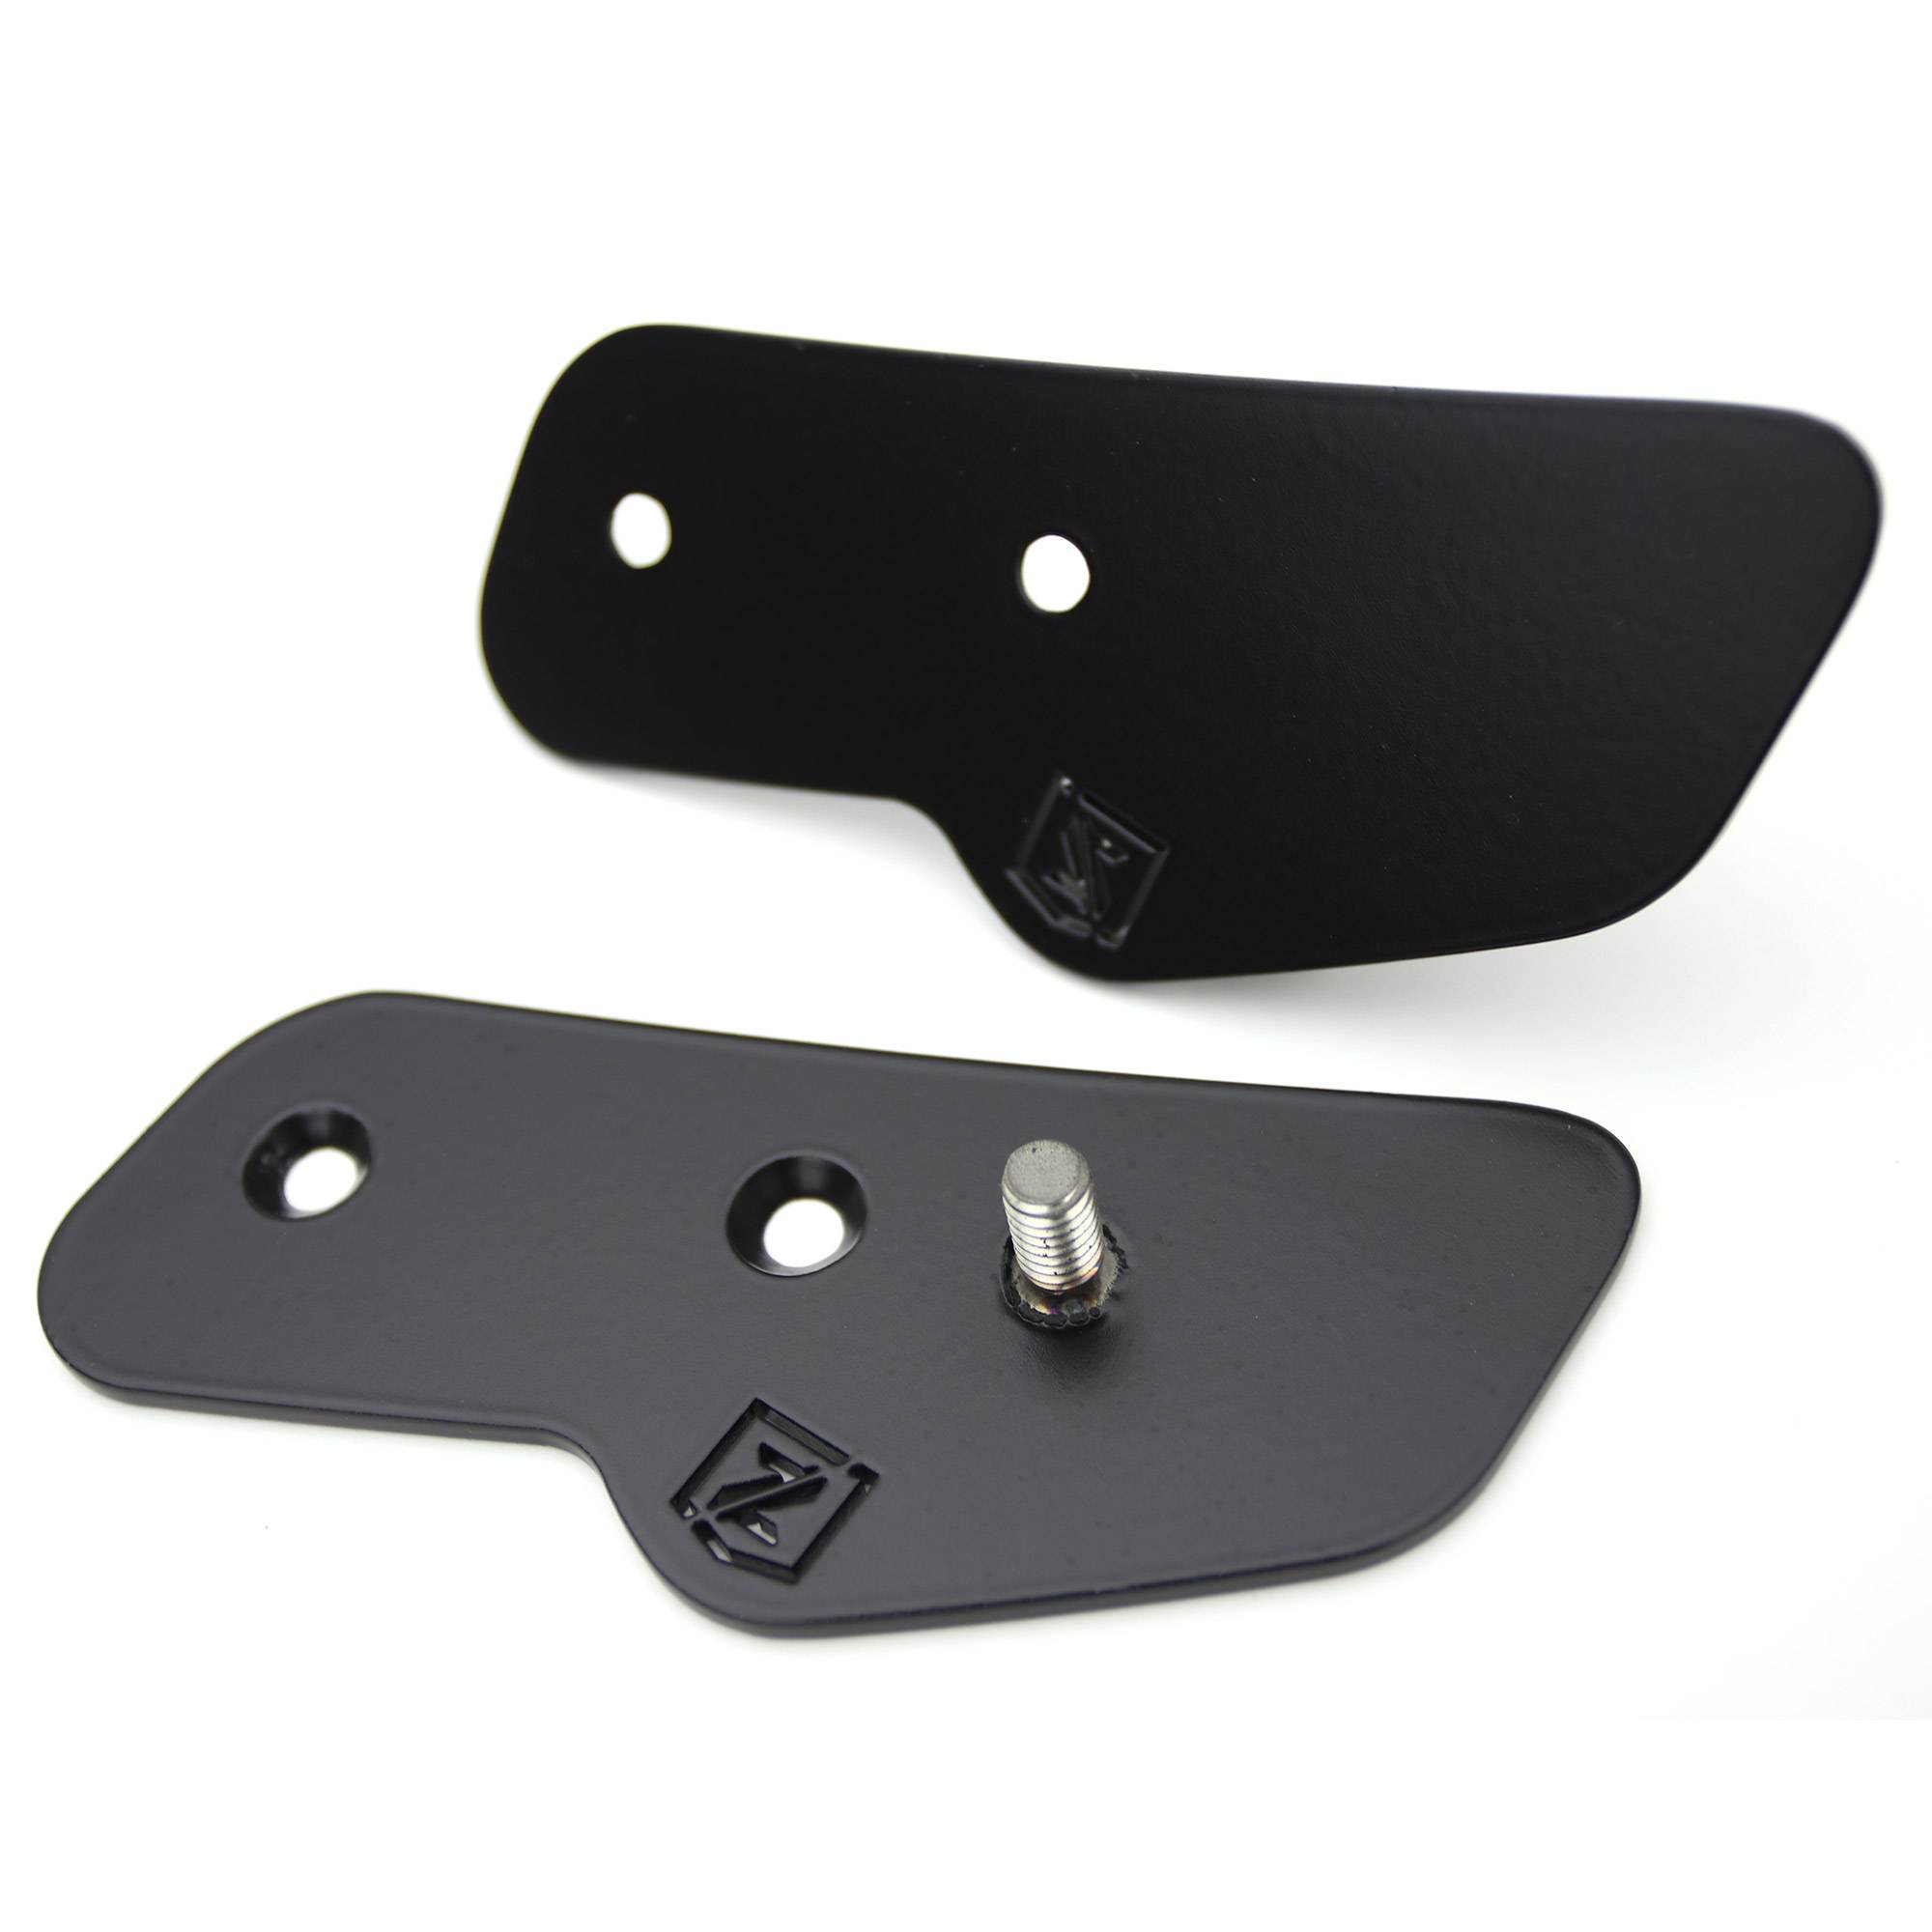 ZROADZ OFF ROAD PRODUCTS - 2021-2022 Ford Bronco Mirror/Ditch Light LED Brackets ONLY, Used to mount (2) 3 inch ZROADZ LED Pod Lights - Part # Z365401-BK2